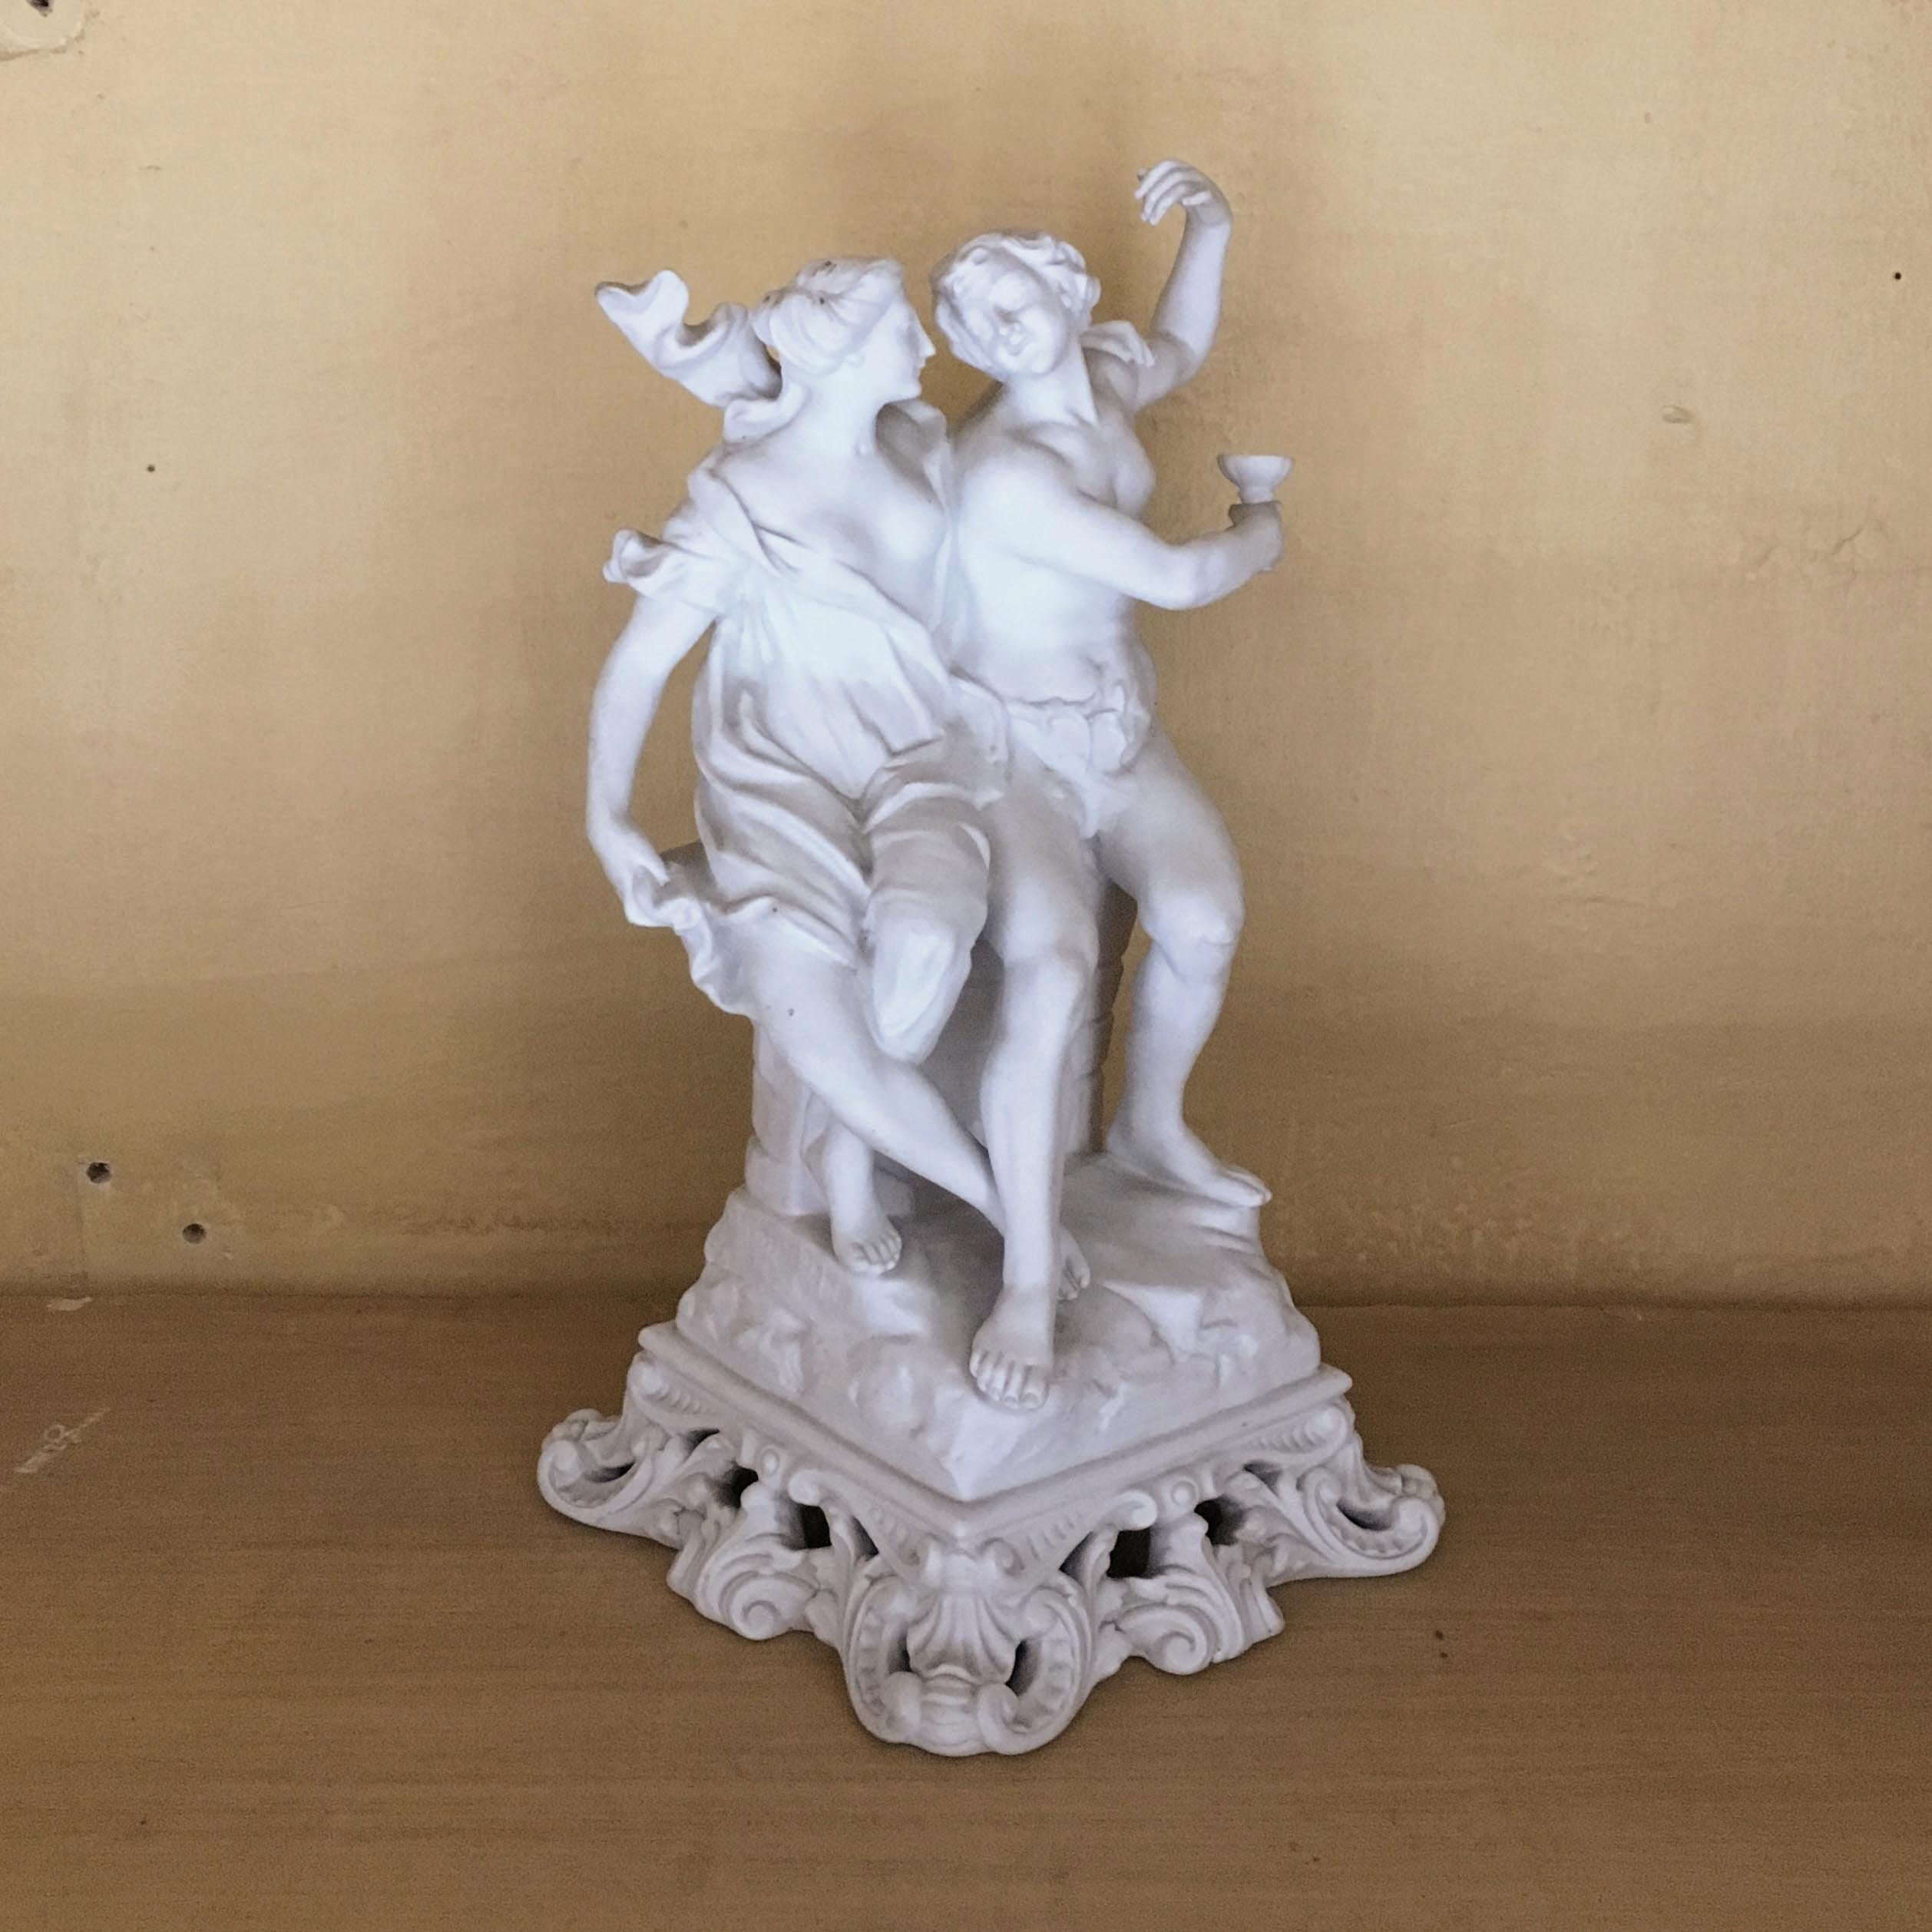 19th Century Italian Capodimonte Biscuit Porcelain Sculpture Depicting a Couple In Good Condition For Sale In Firenze, Tuscany